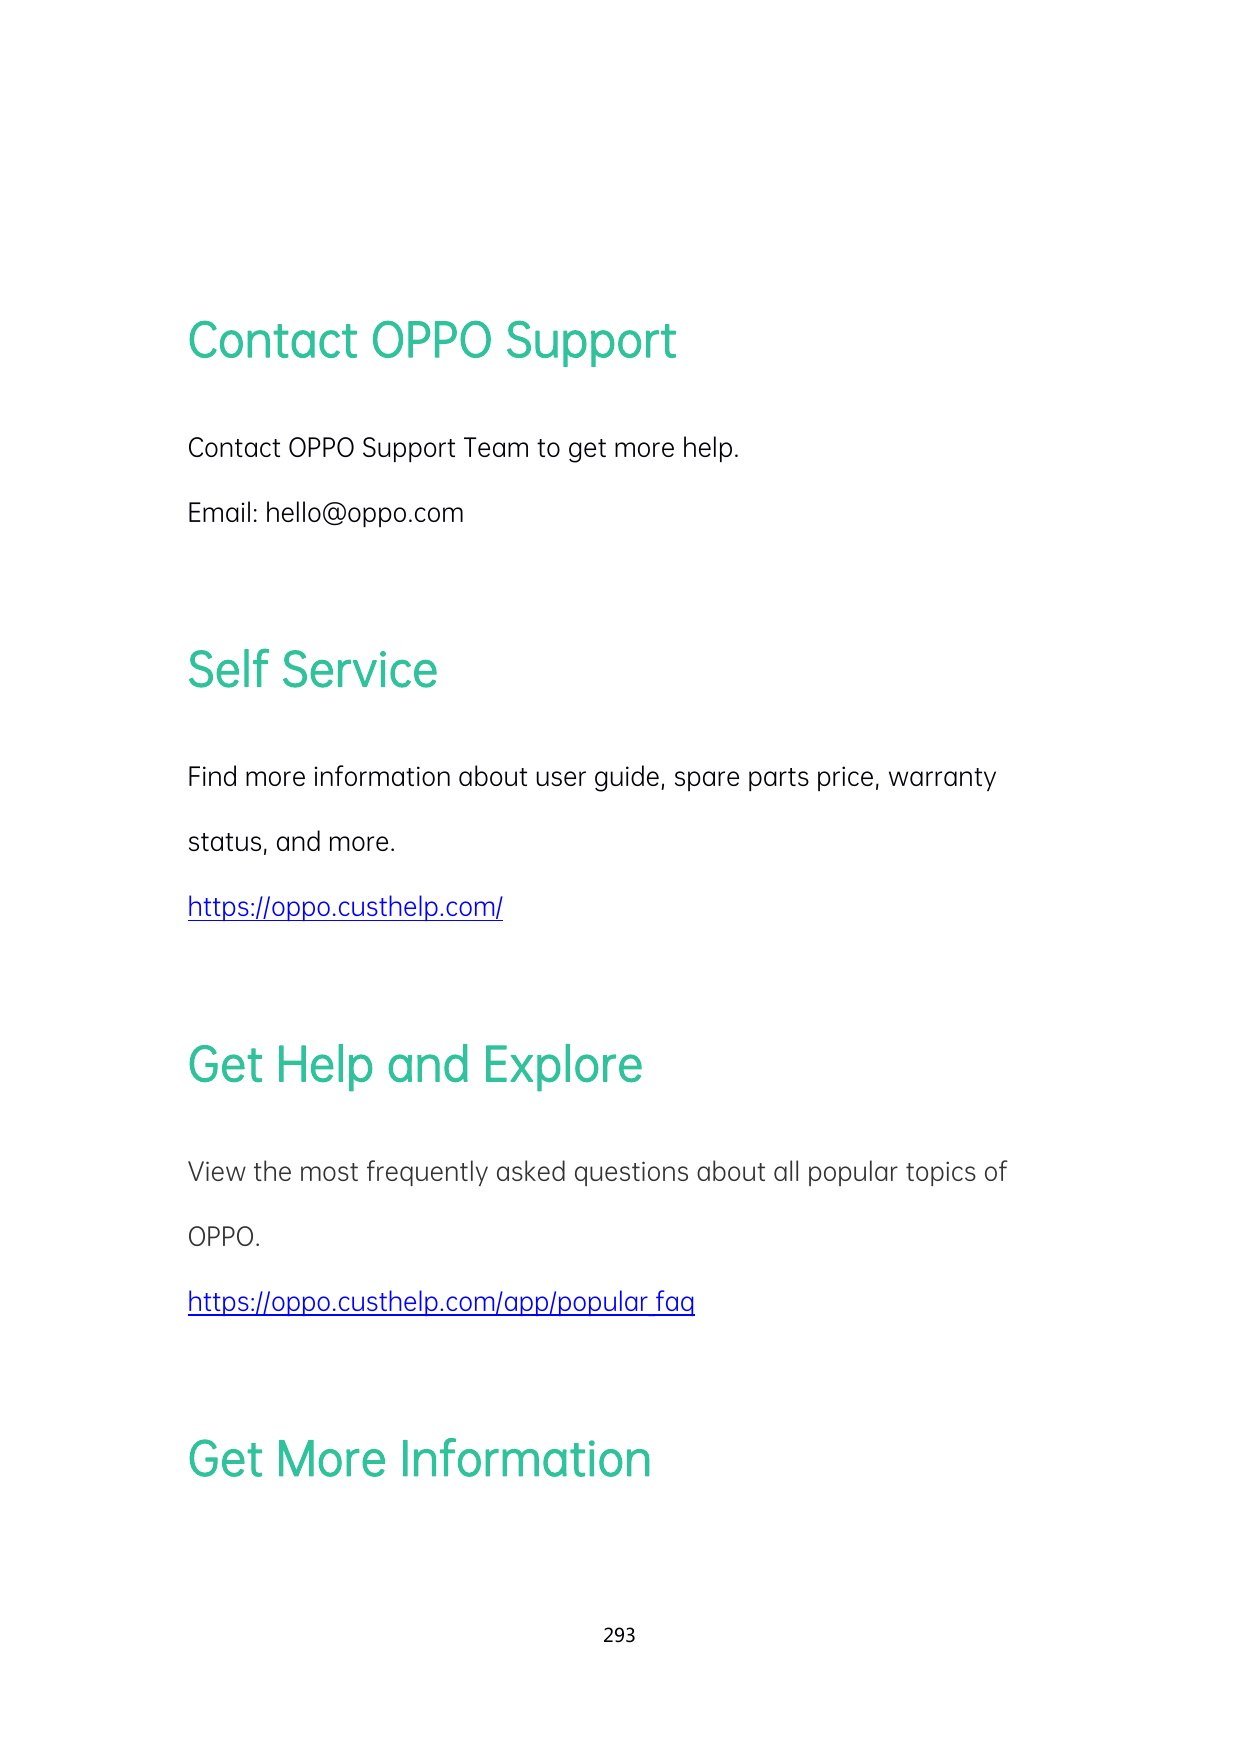 Contact OPPO SupportContact OPPO Support Team to get more help.Email: hello@oppo.comSelf ServiceFind more information about user